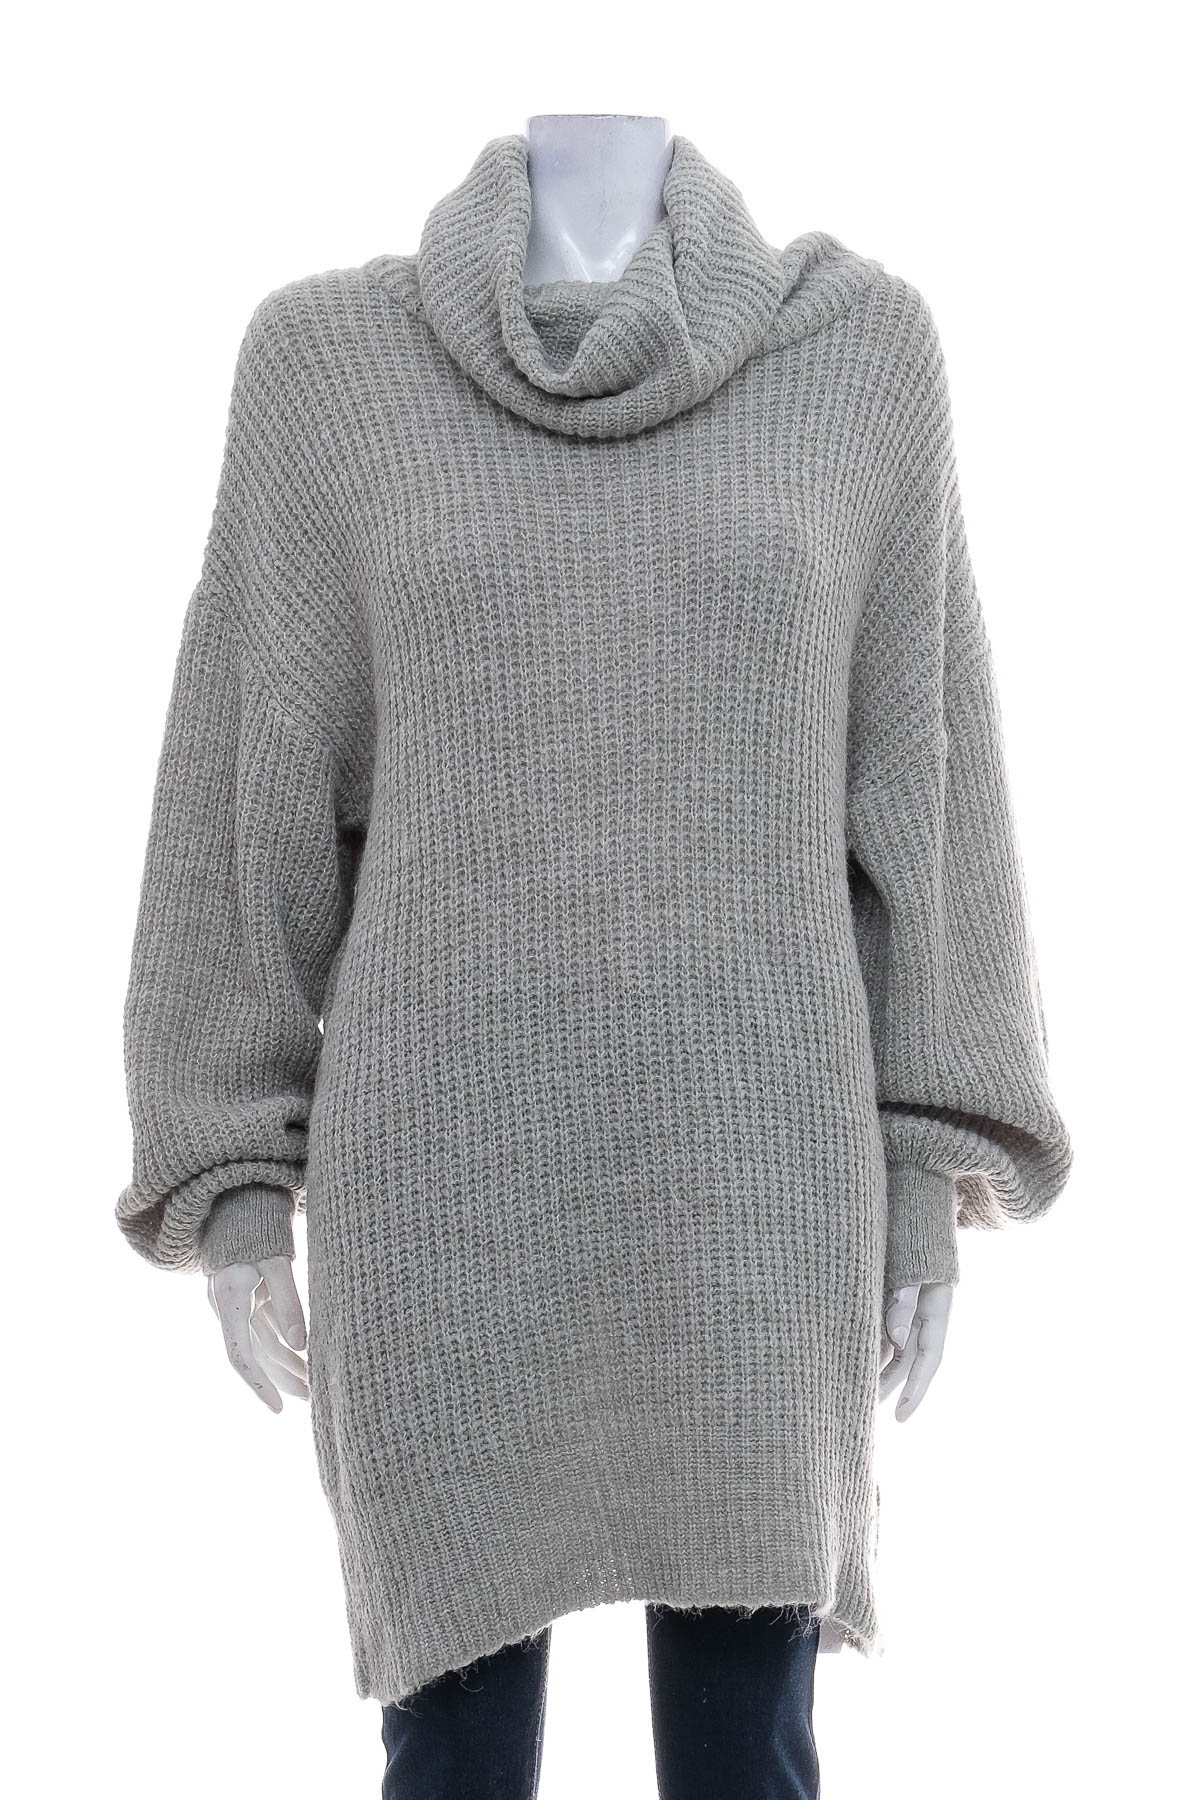 Sweter damski - LeGer by LENA GERCKE for ABOUT YOU - 0